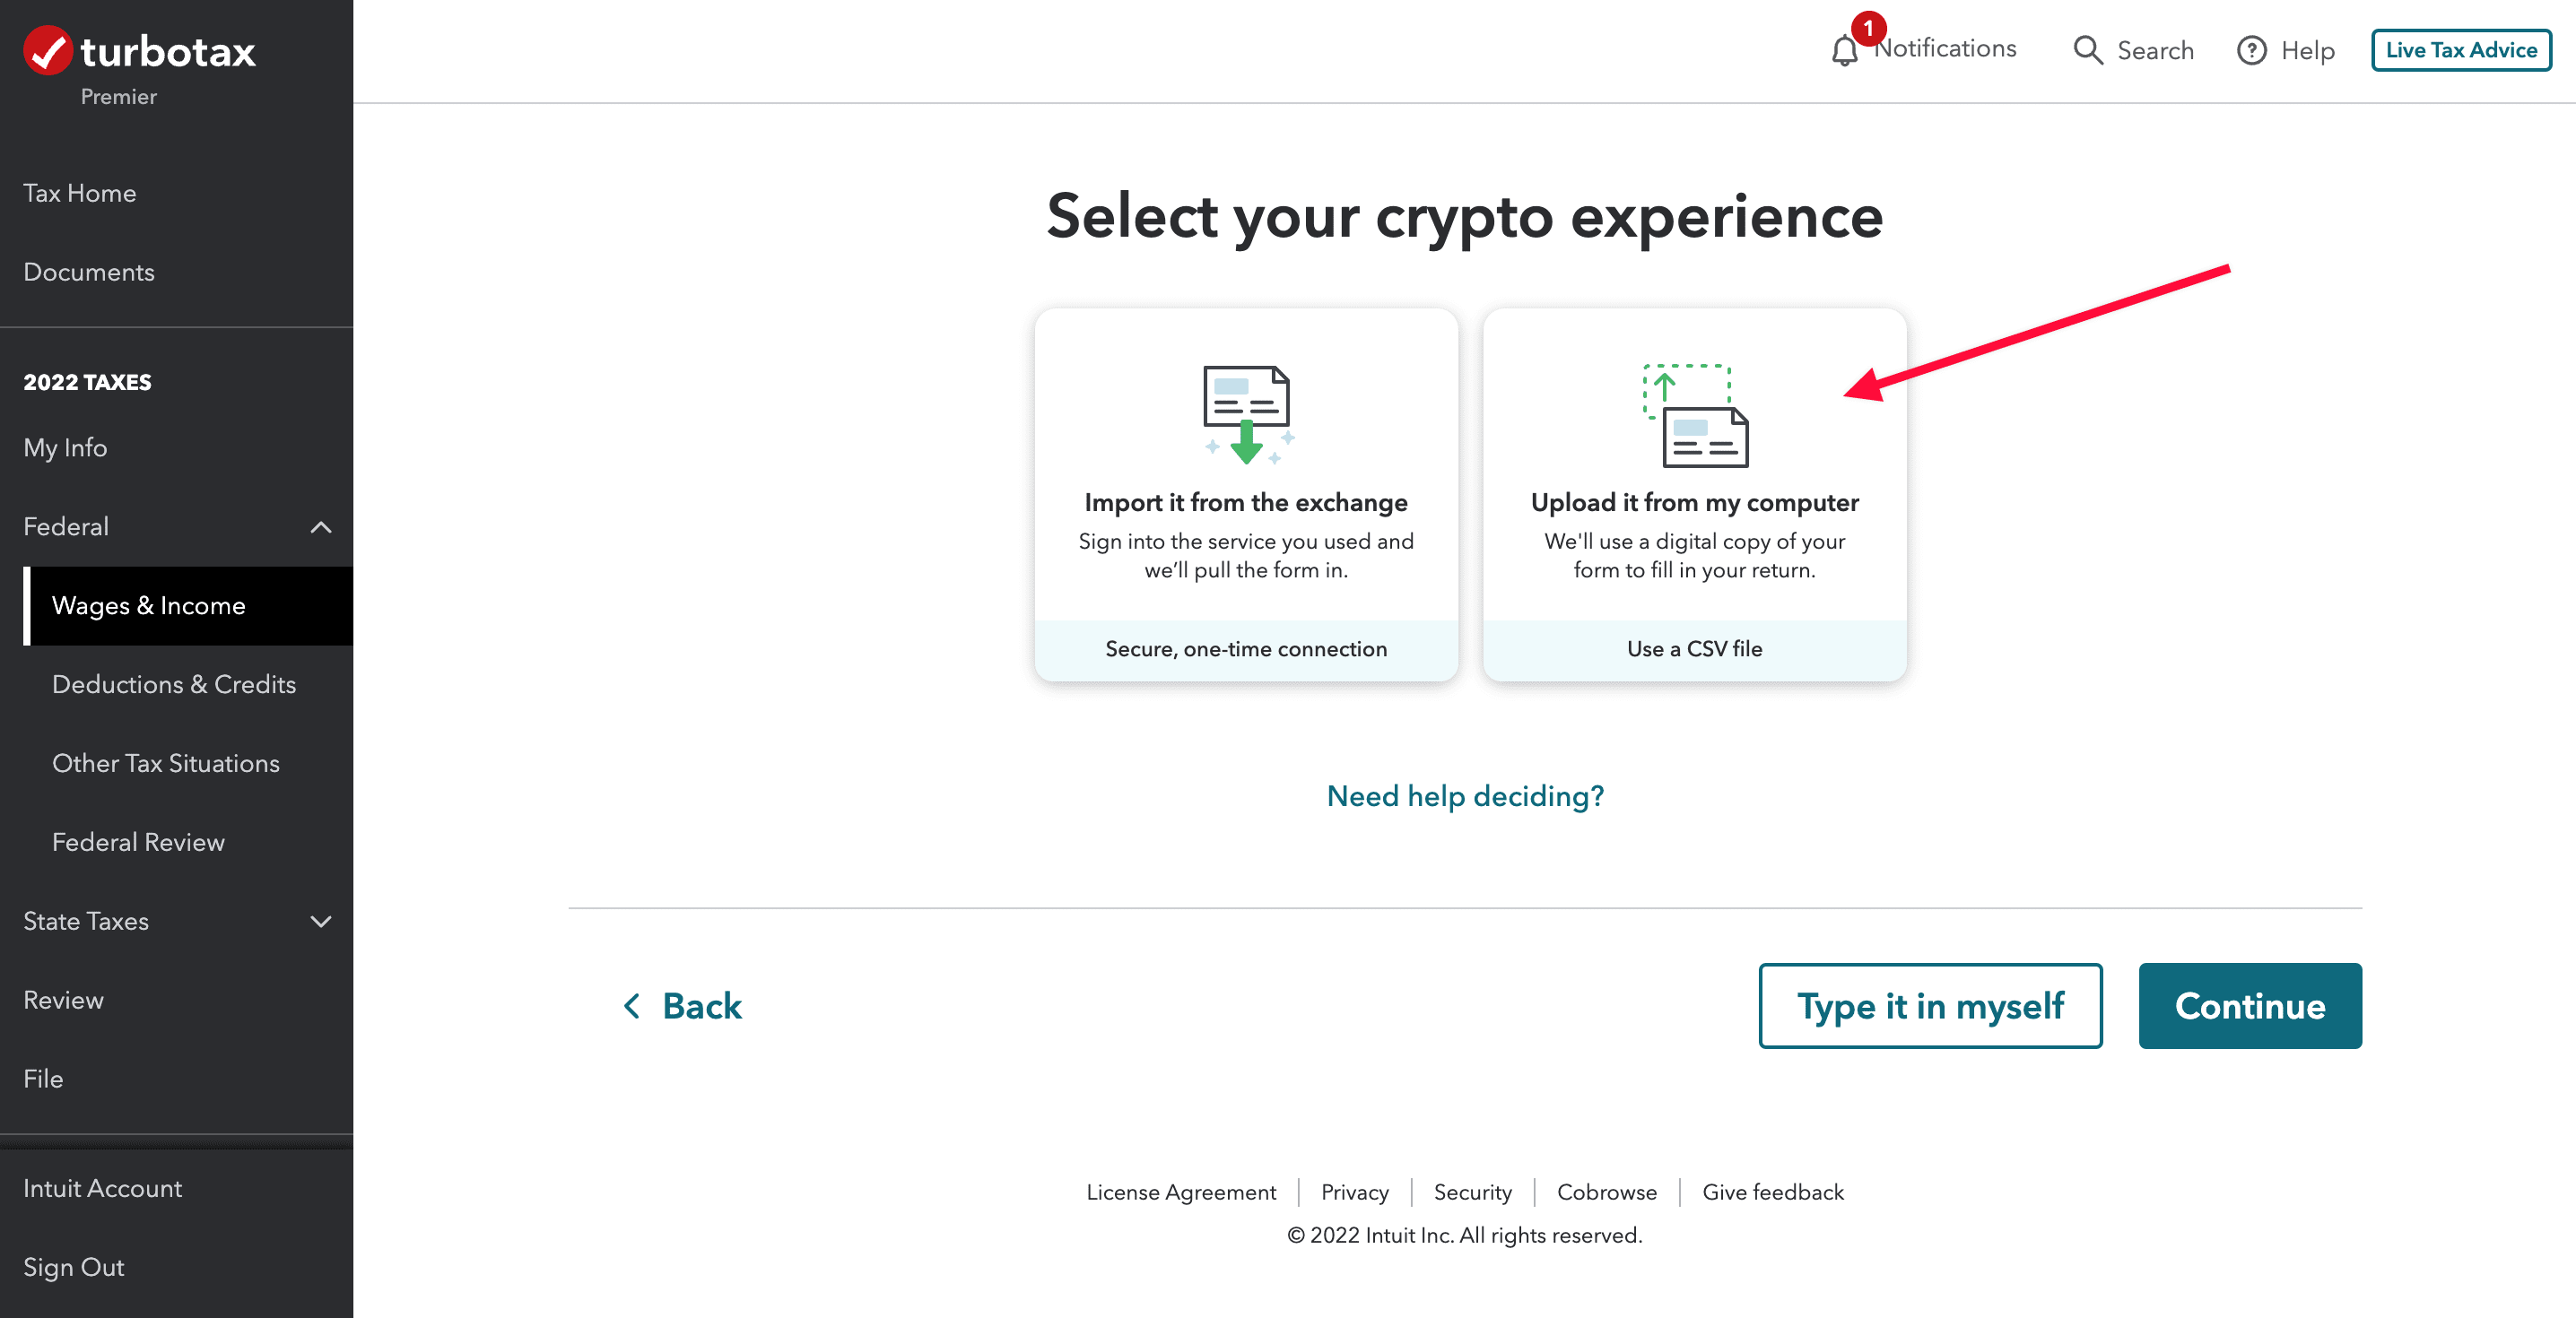 Turbotax select your crypto experience